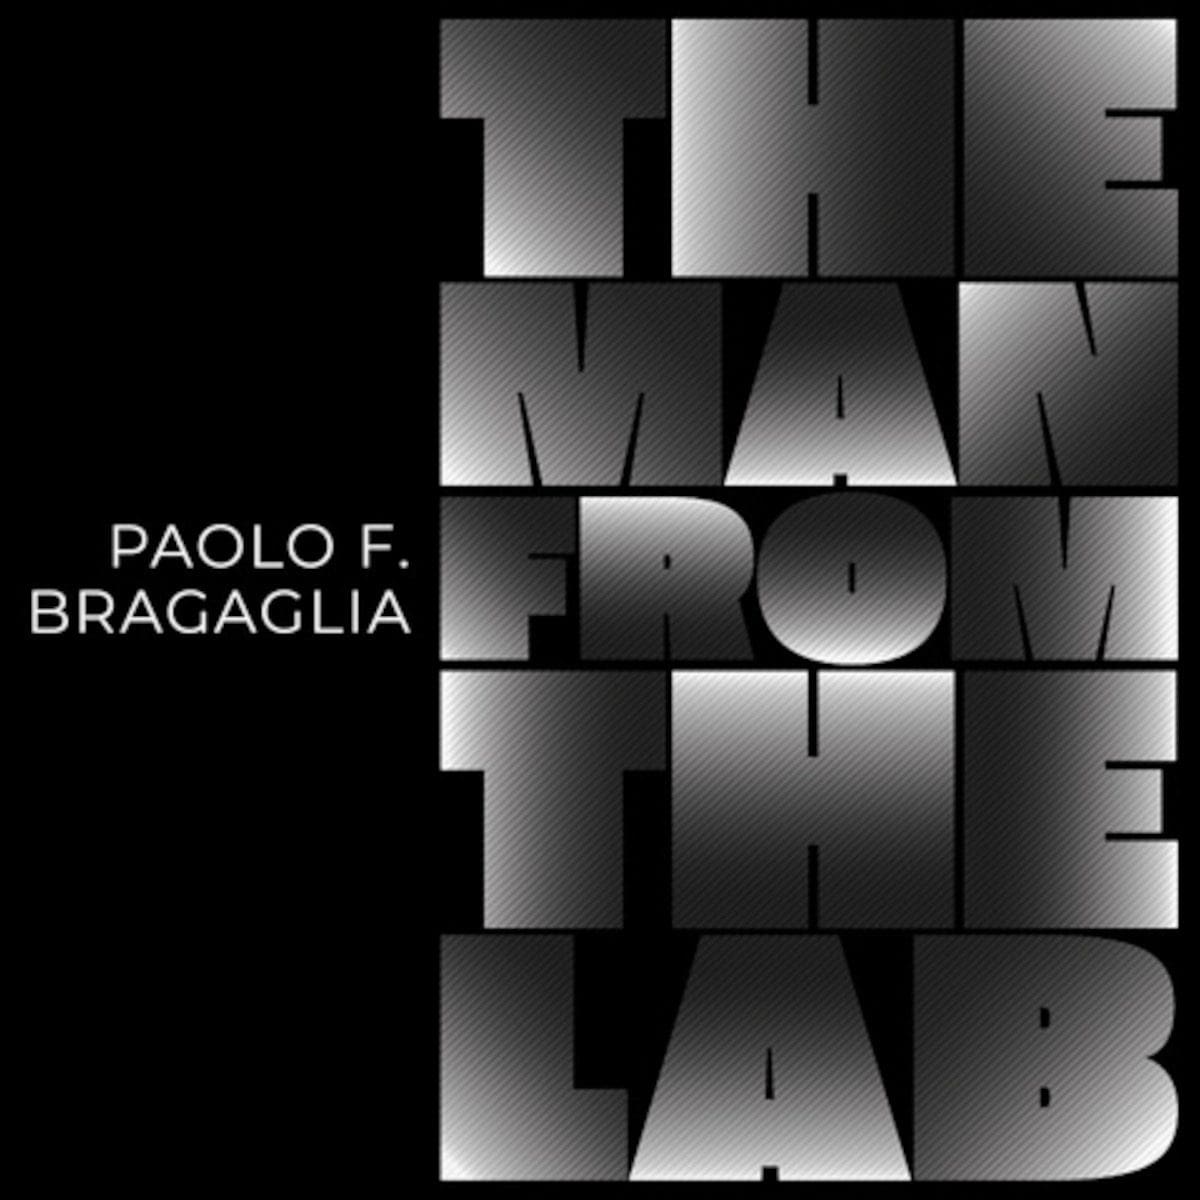 Paolo F. Bragaglia returns with OST 'The Man from the Lab' on Minus Habens Records